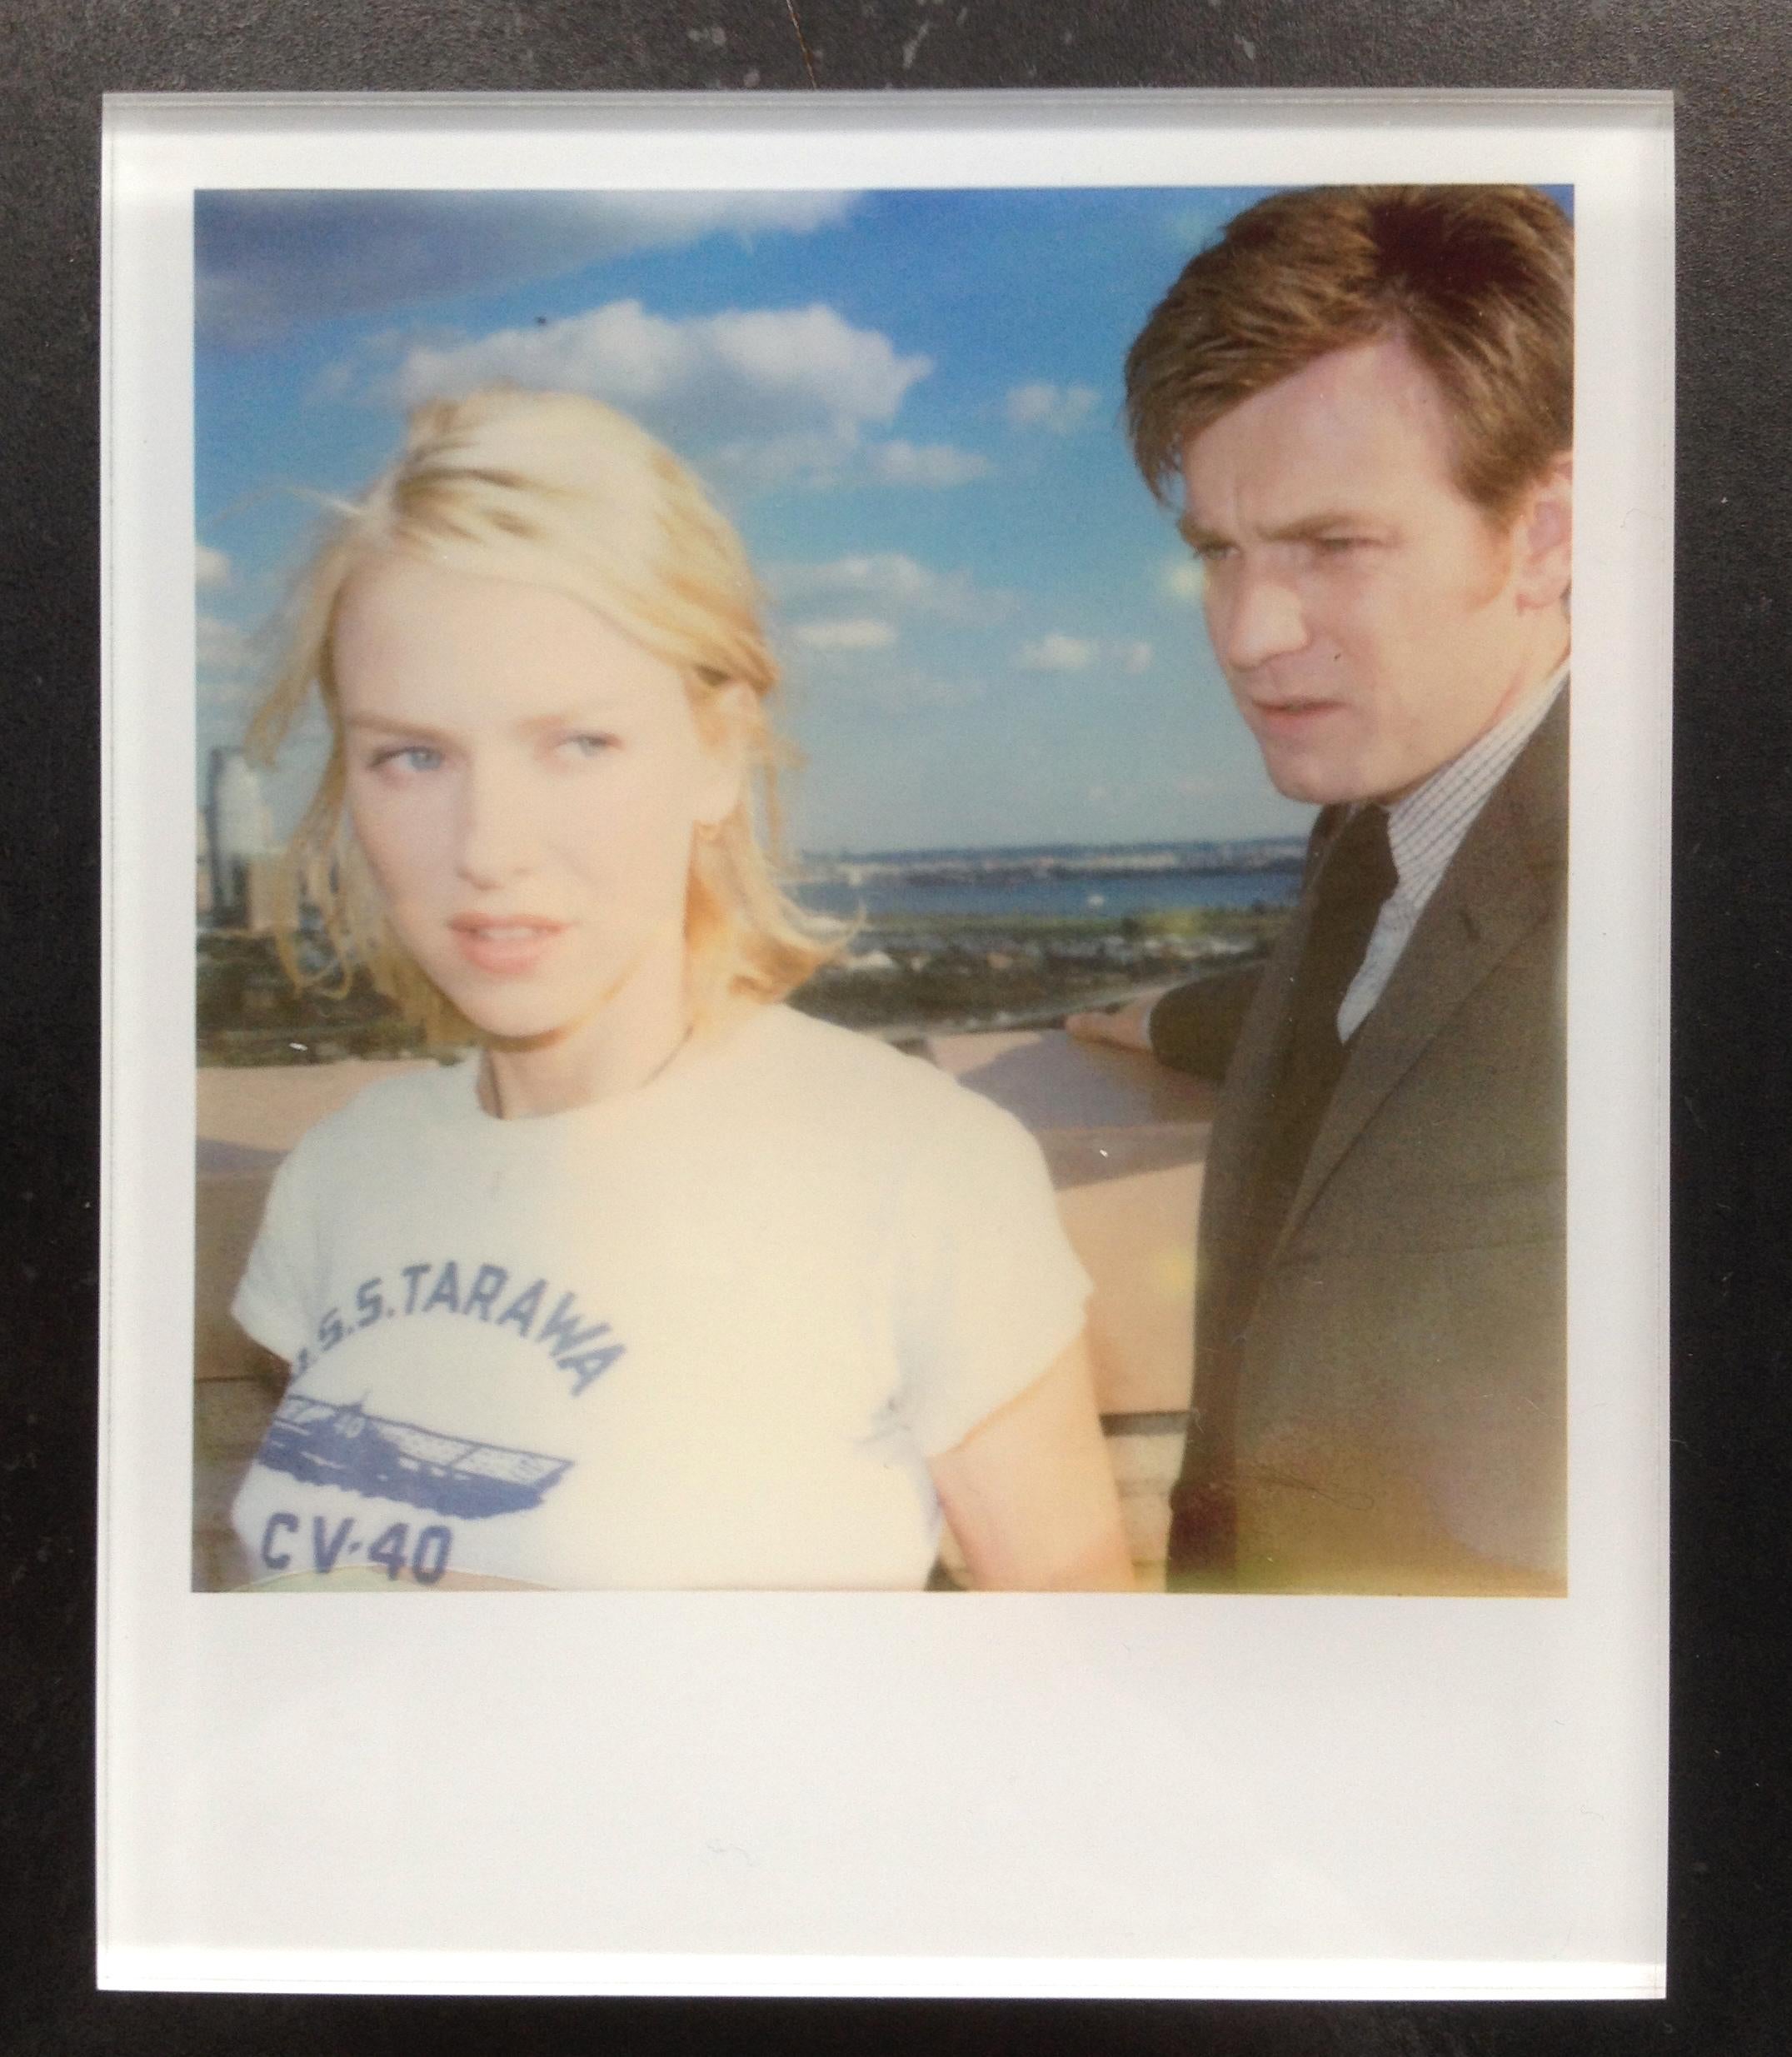 Stefanie Schneider's Minis
'Lila and Sam" (Stay), 2006
signed and signature brand on verso
Lambda digital Color Photographs based on the Polaroid

from the movie 'Stay' directed by Marc Forster and featuring Ewan McGregor and Naomi Watts.

Polaroid